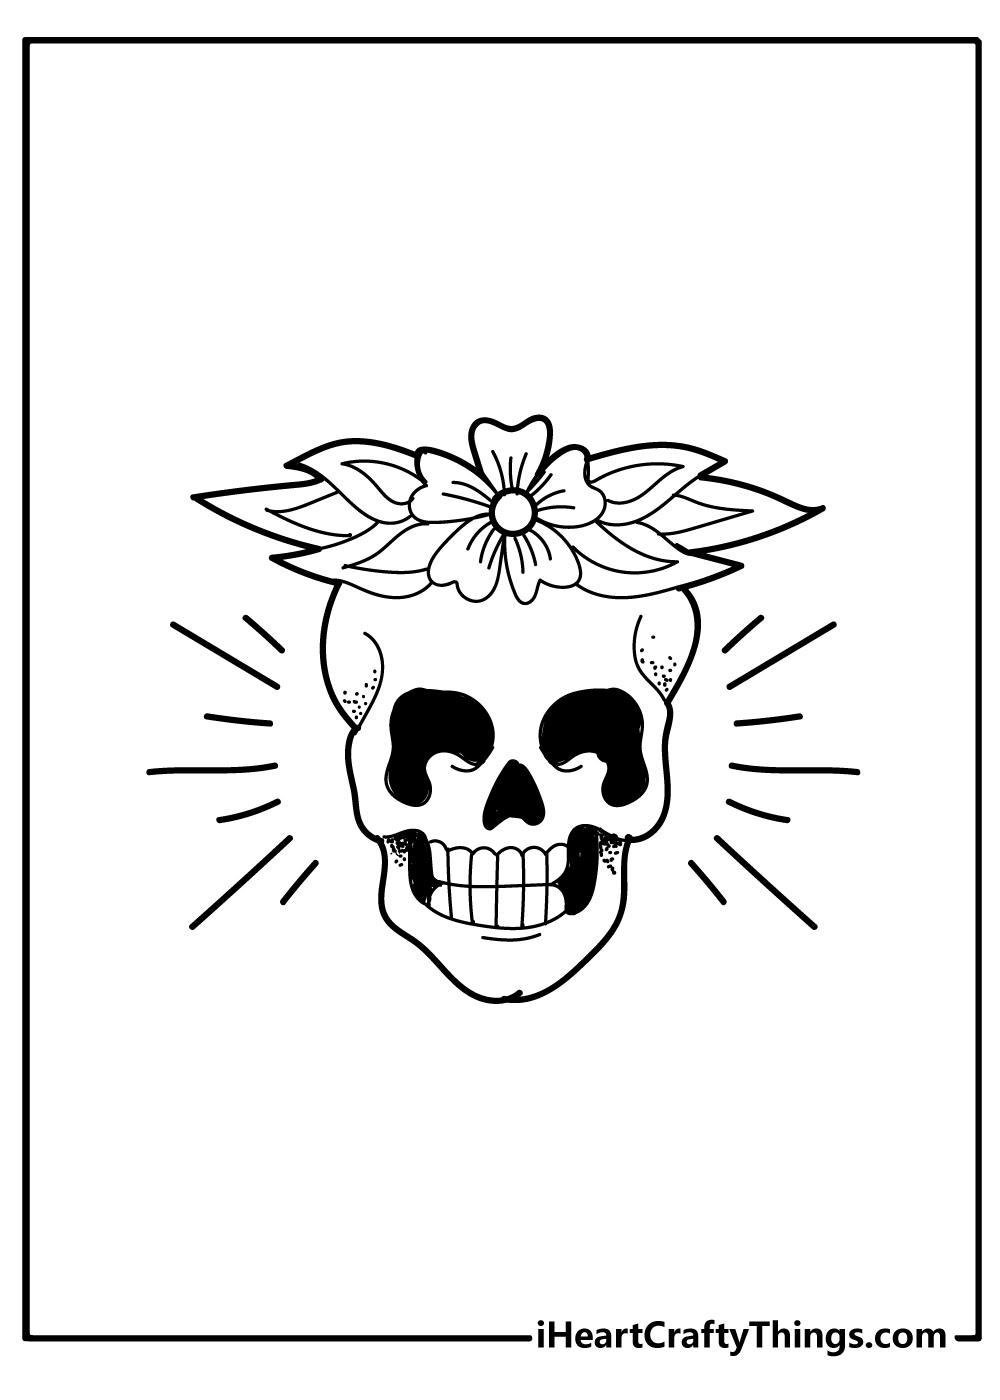 Tattoos coloring pages free printables